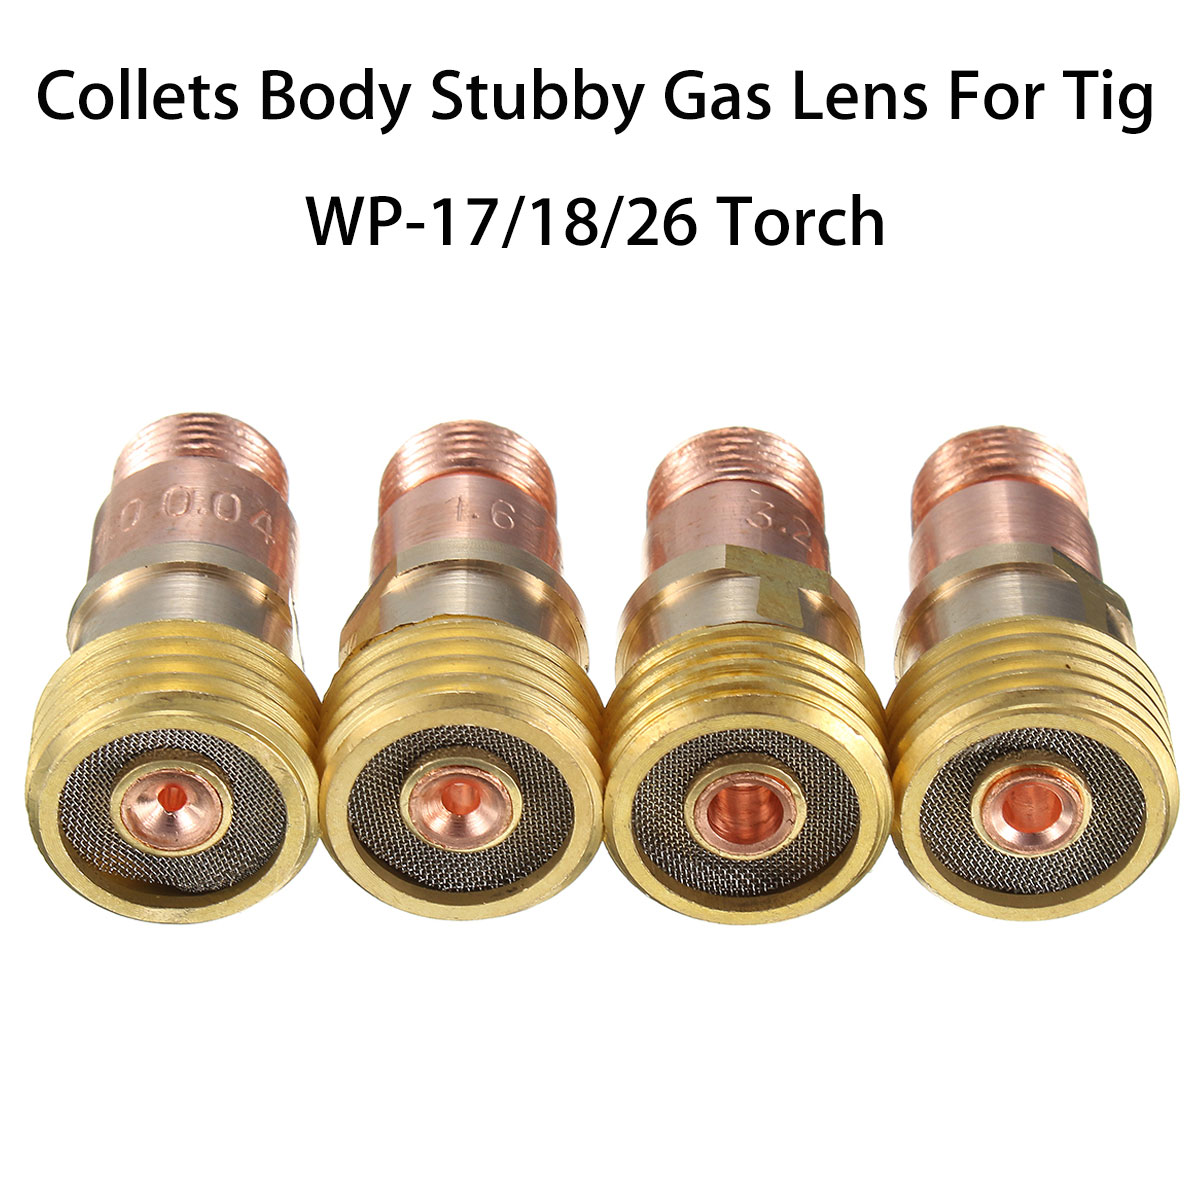 Brass-Collets-Stubby-Gas-Lens-Connector-With-Mesh-For-Tig-WP-171826-Torch-1138923-2